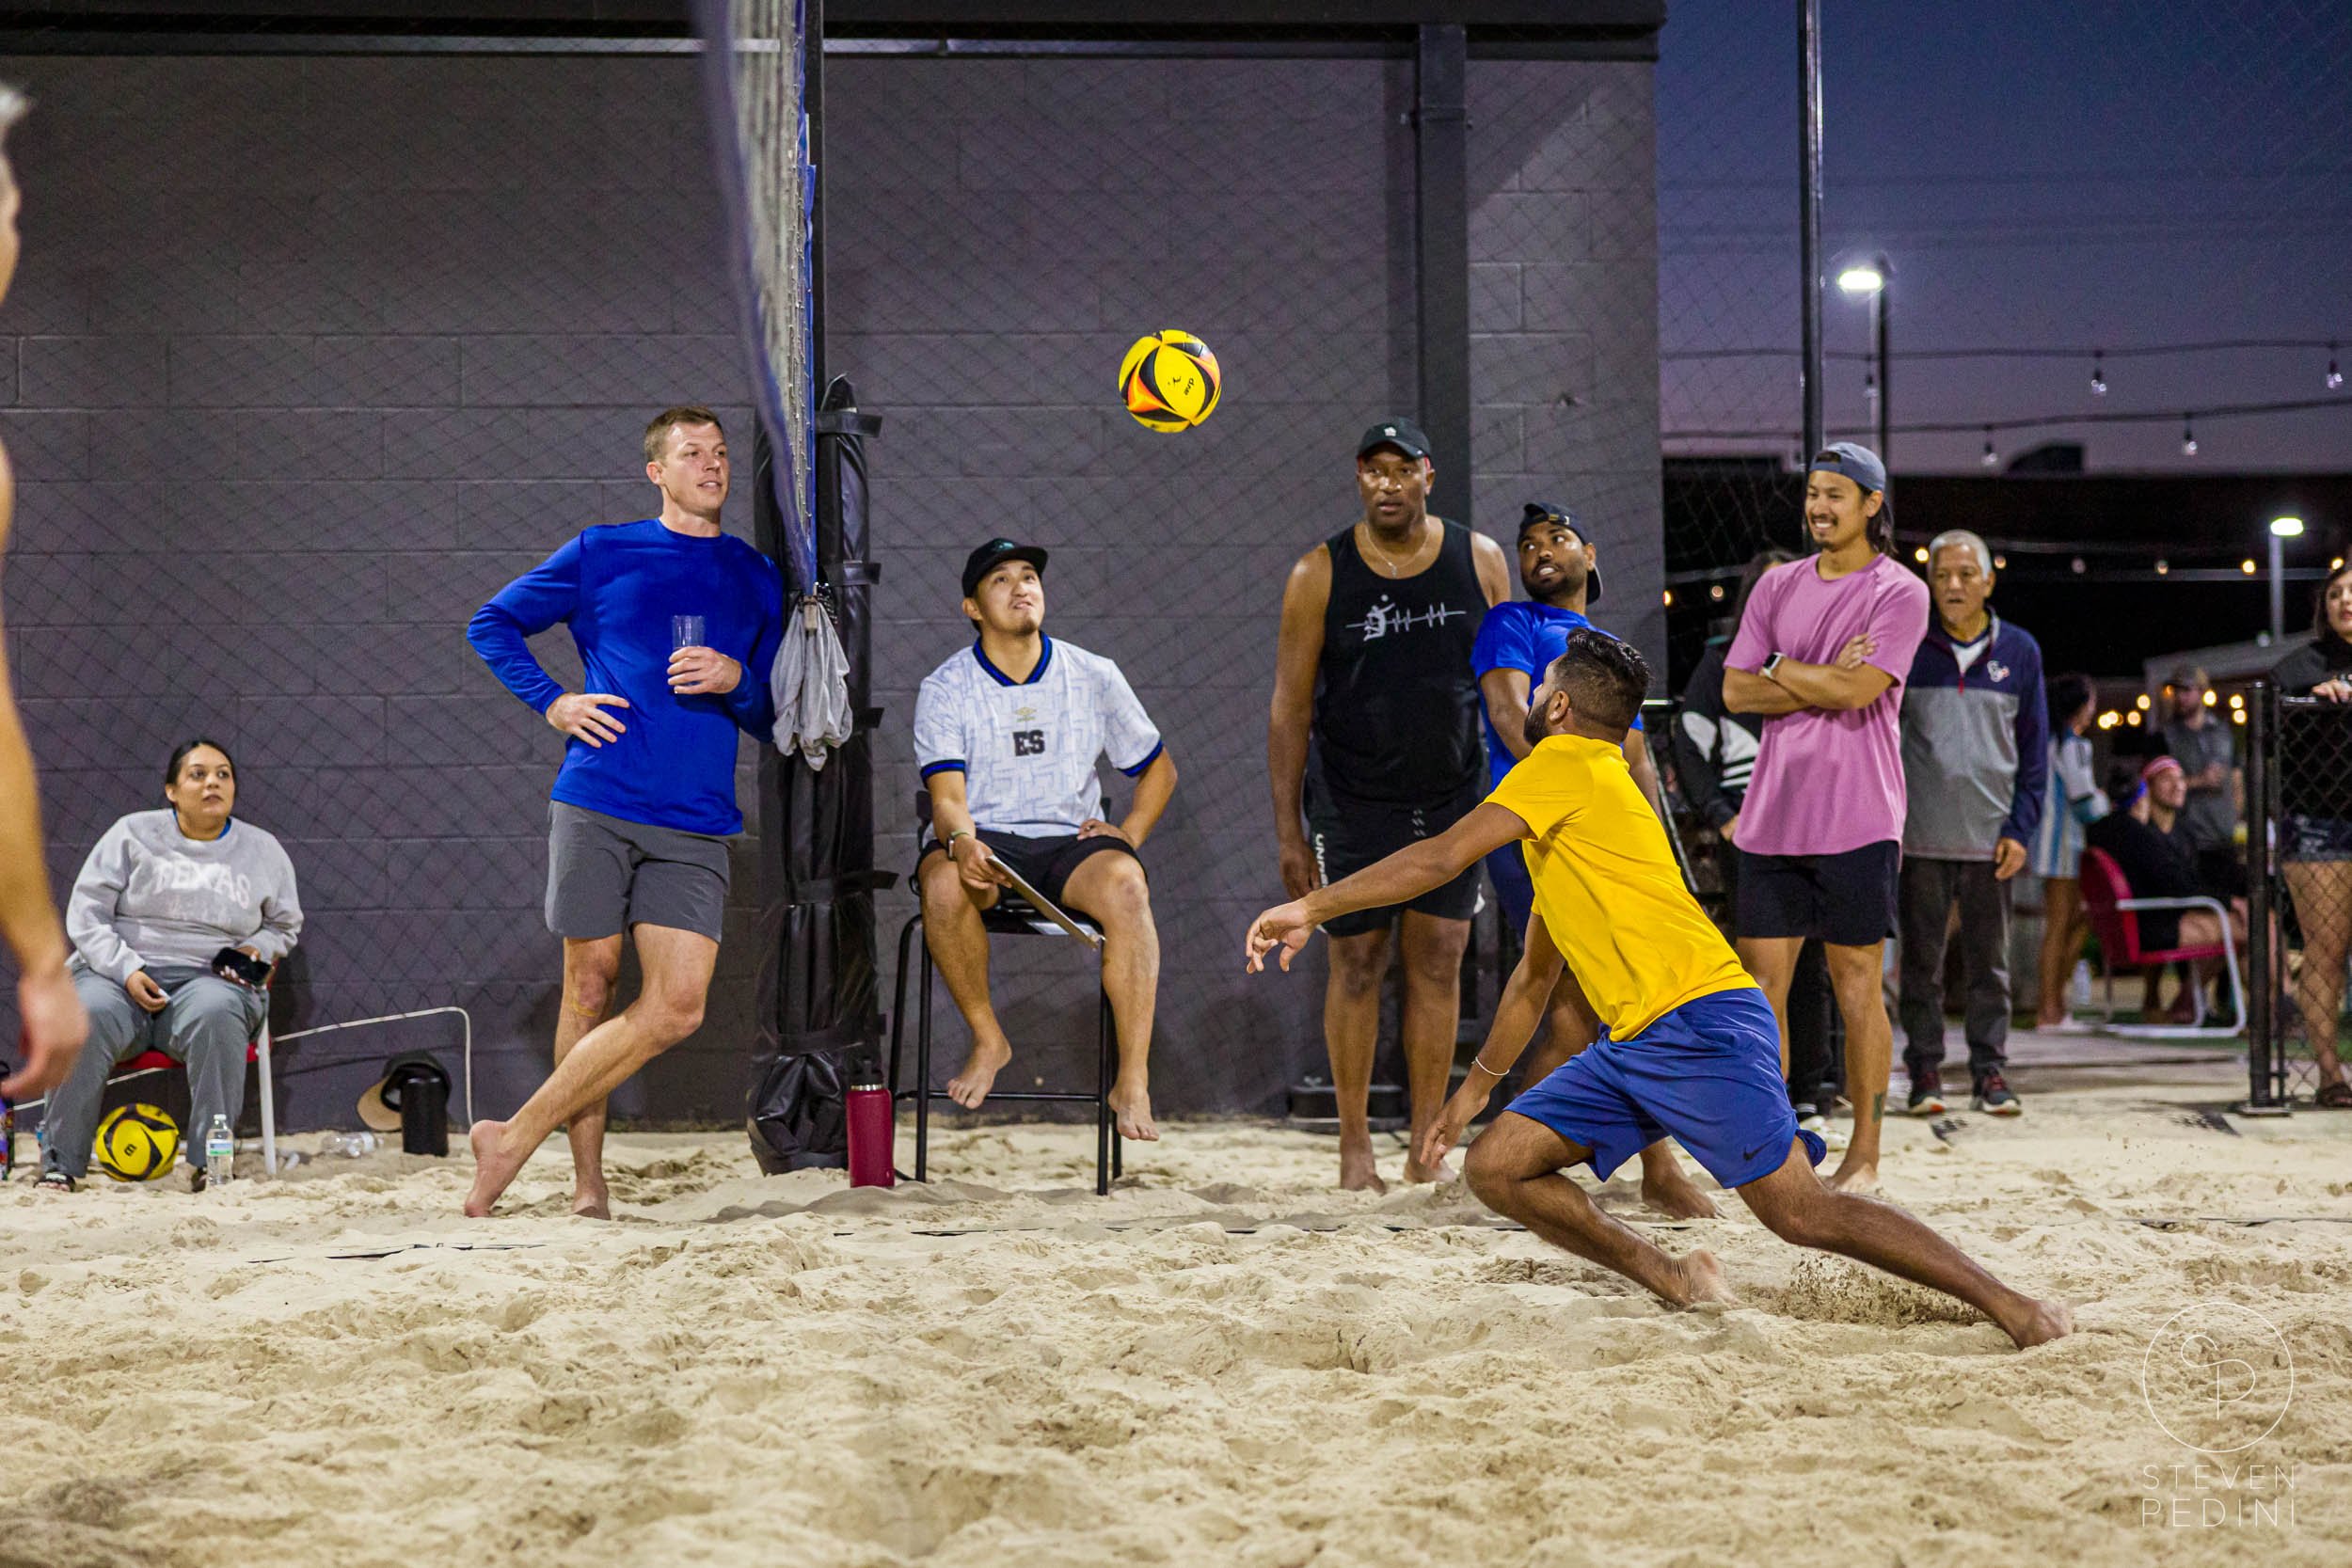 Steven Pedini Photography - Bumpy Pickle - Sand Volleyball - Houston TX - World Cup of Volleyball - 00338.jpg